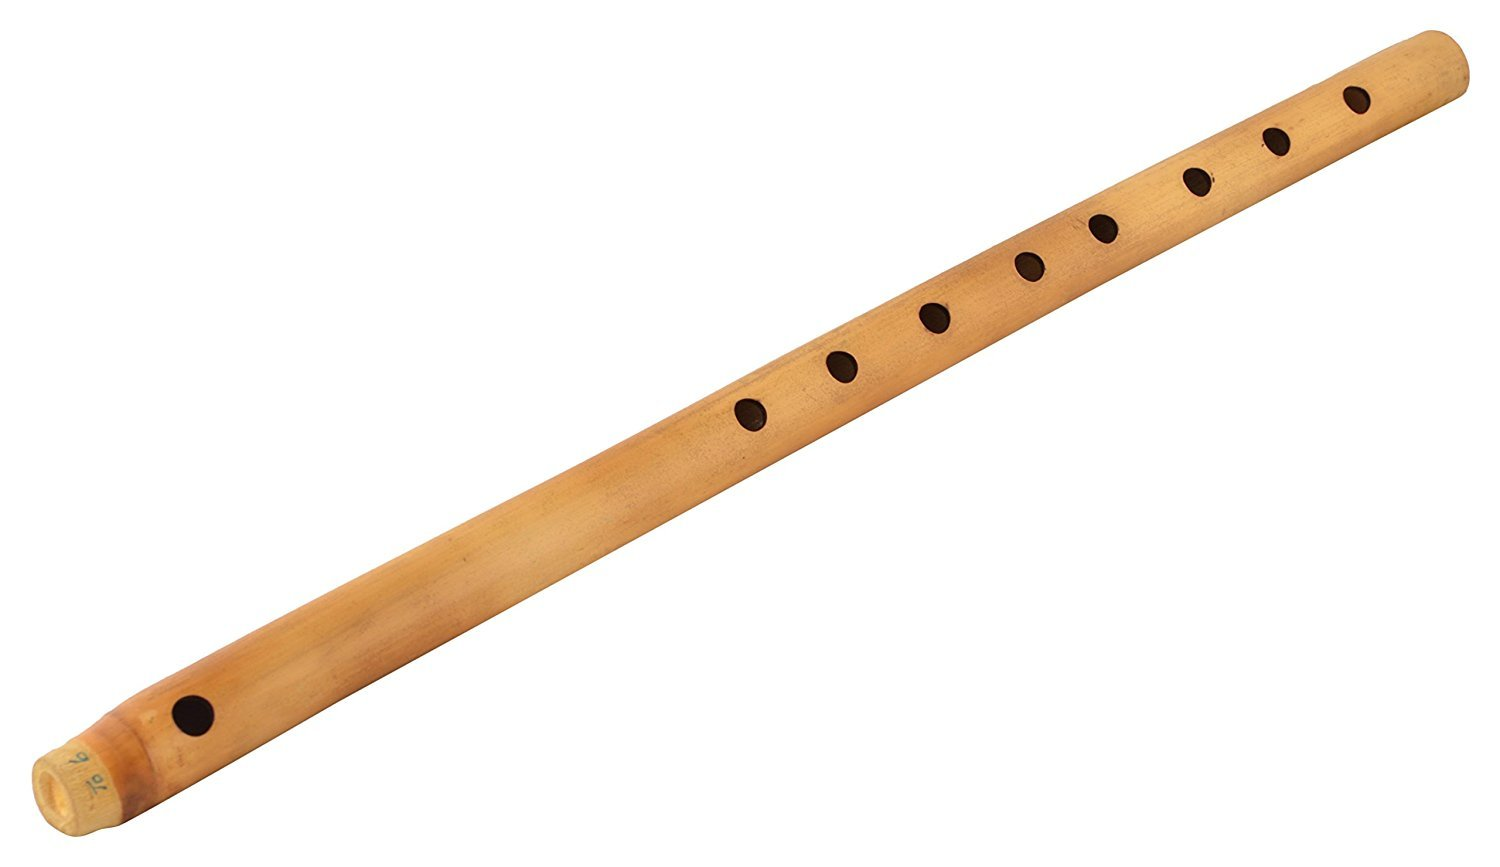 How to play an 8 hole bamboo flute